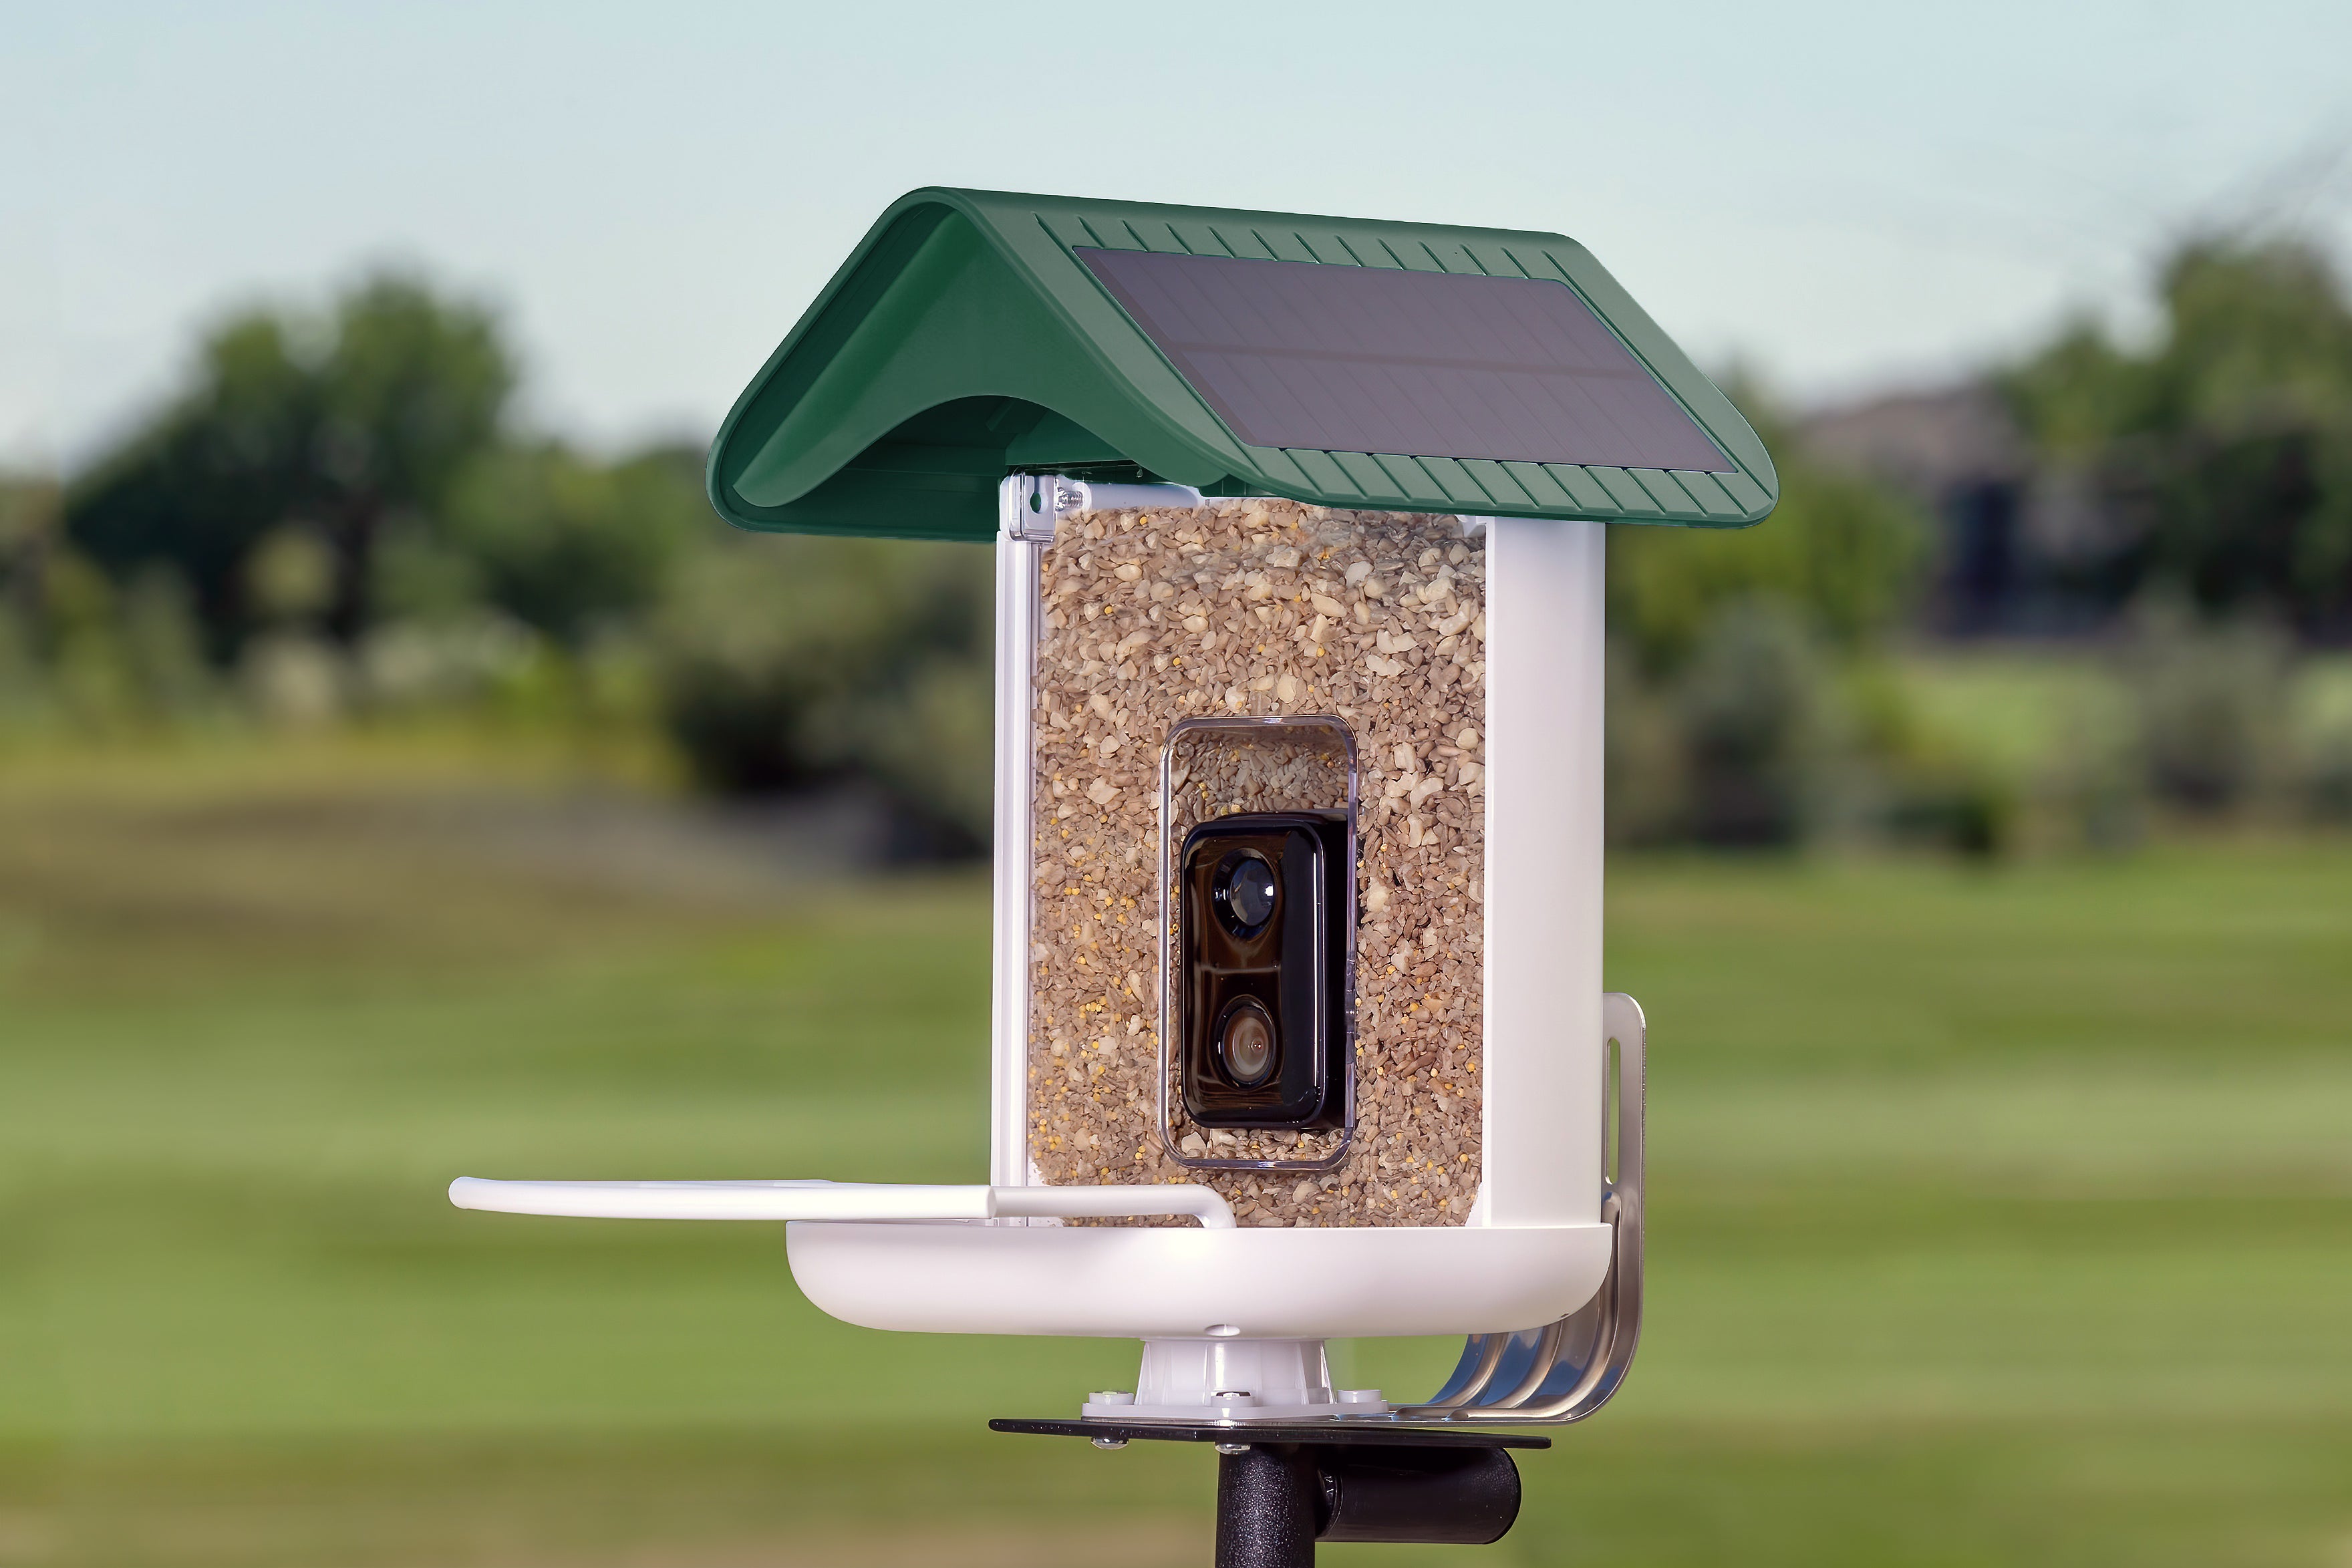 Woman Sets Up Backyard Bird Feeder Cam to Capture Feathered Friends